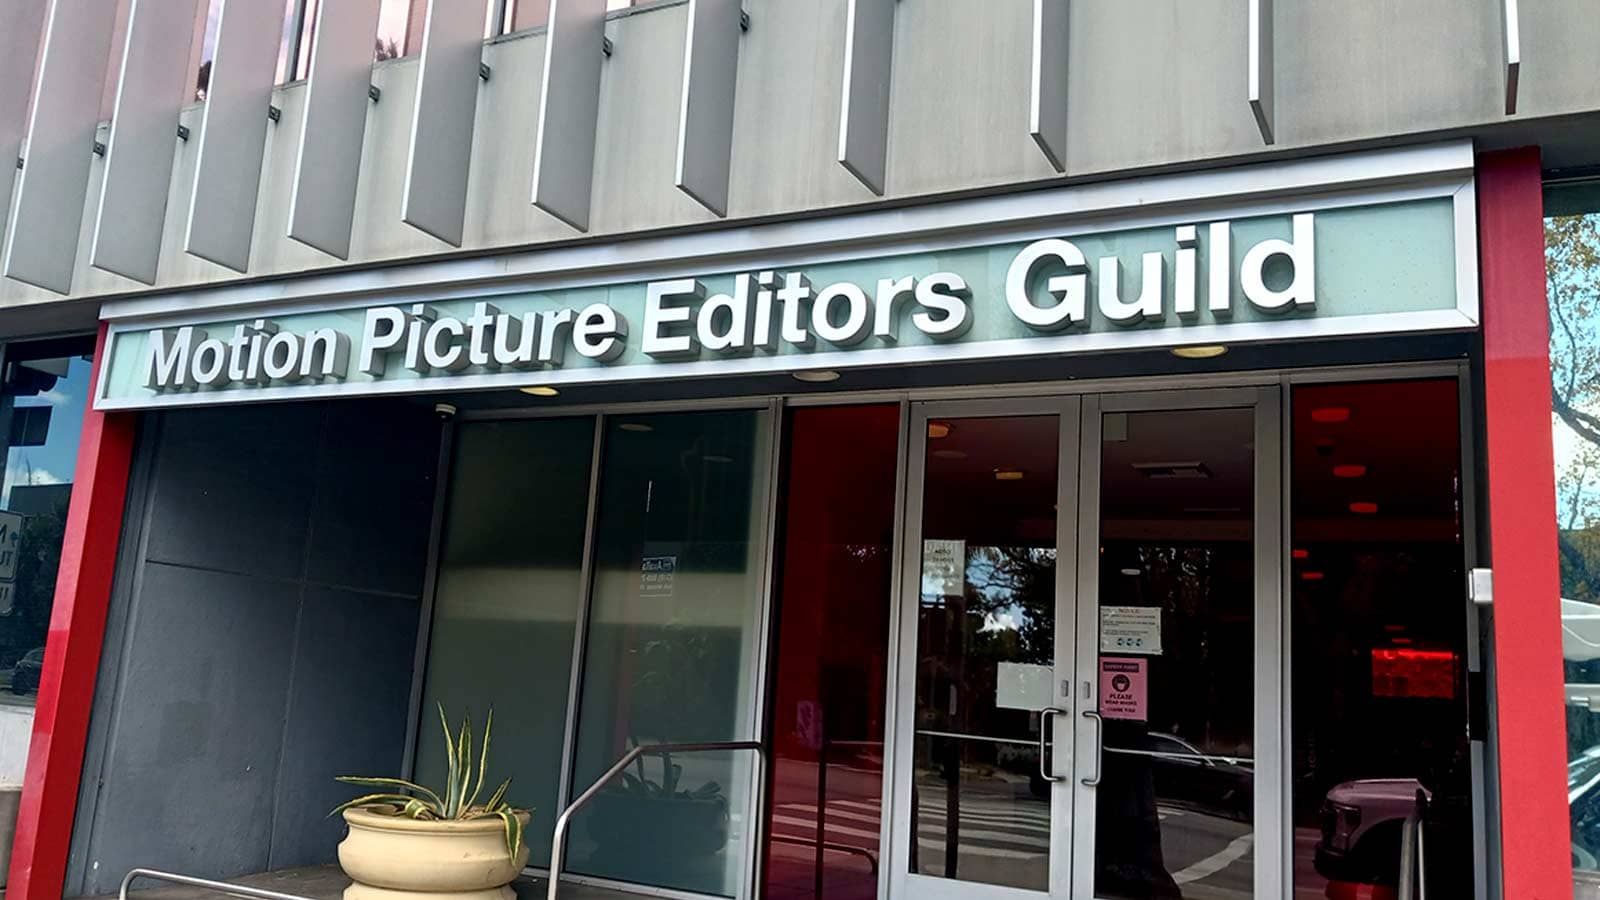 Motion Picture Editors Guild 3D sign attached outdoors